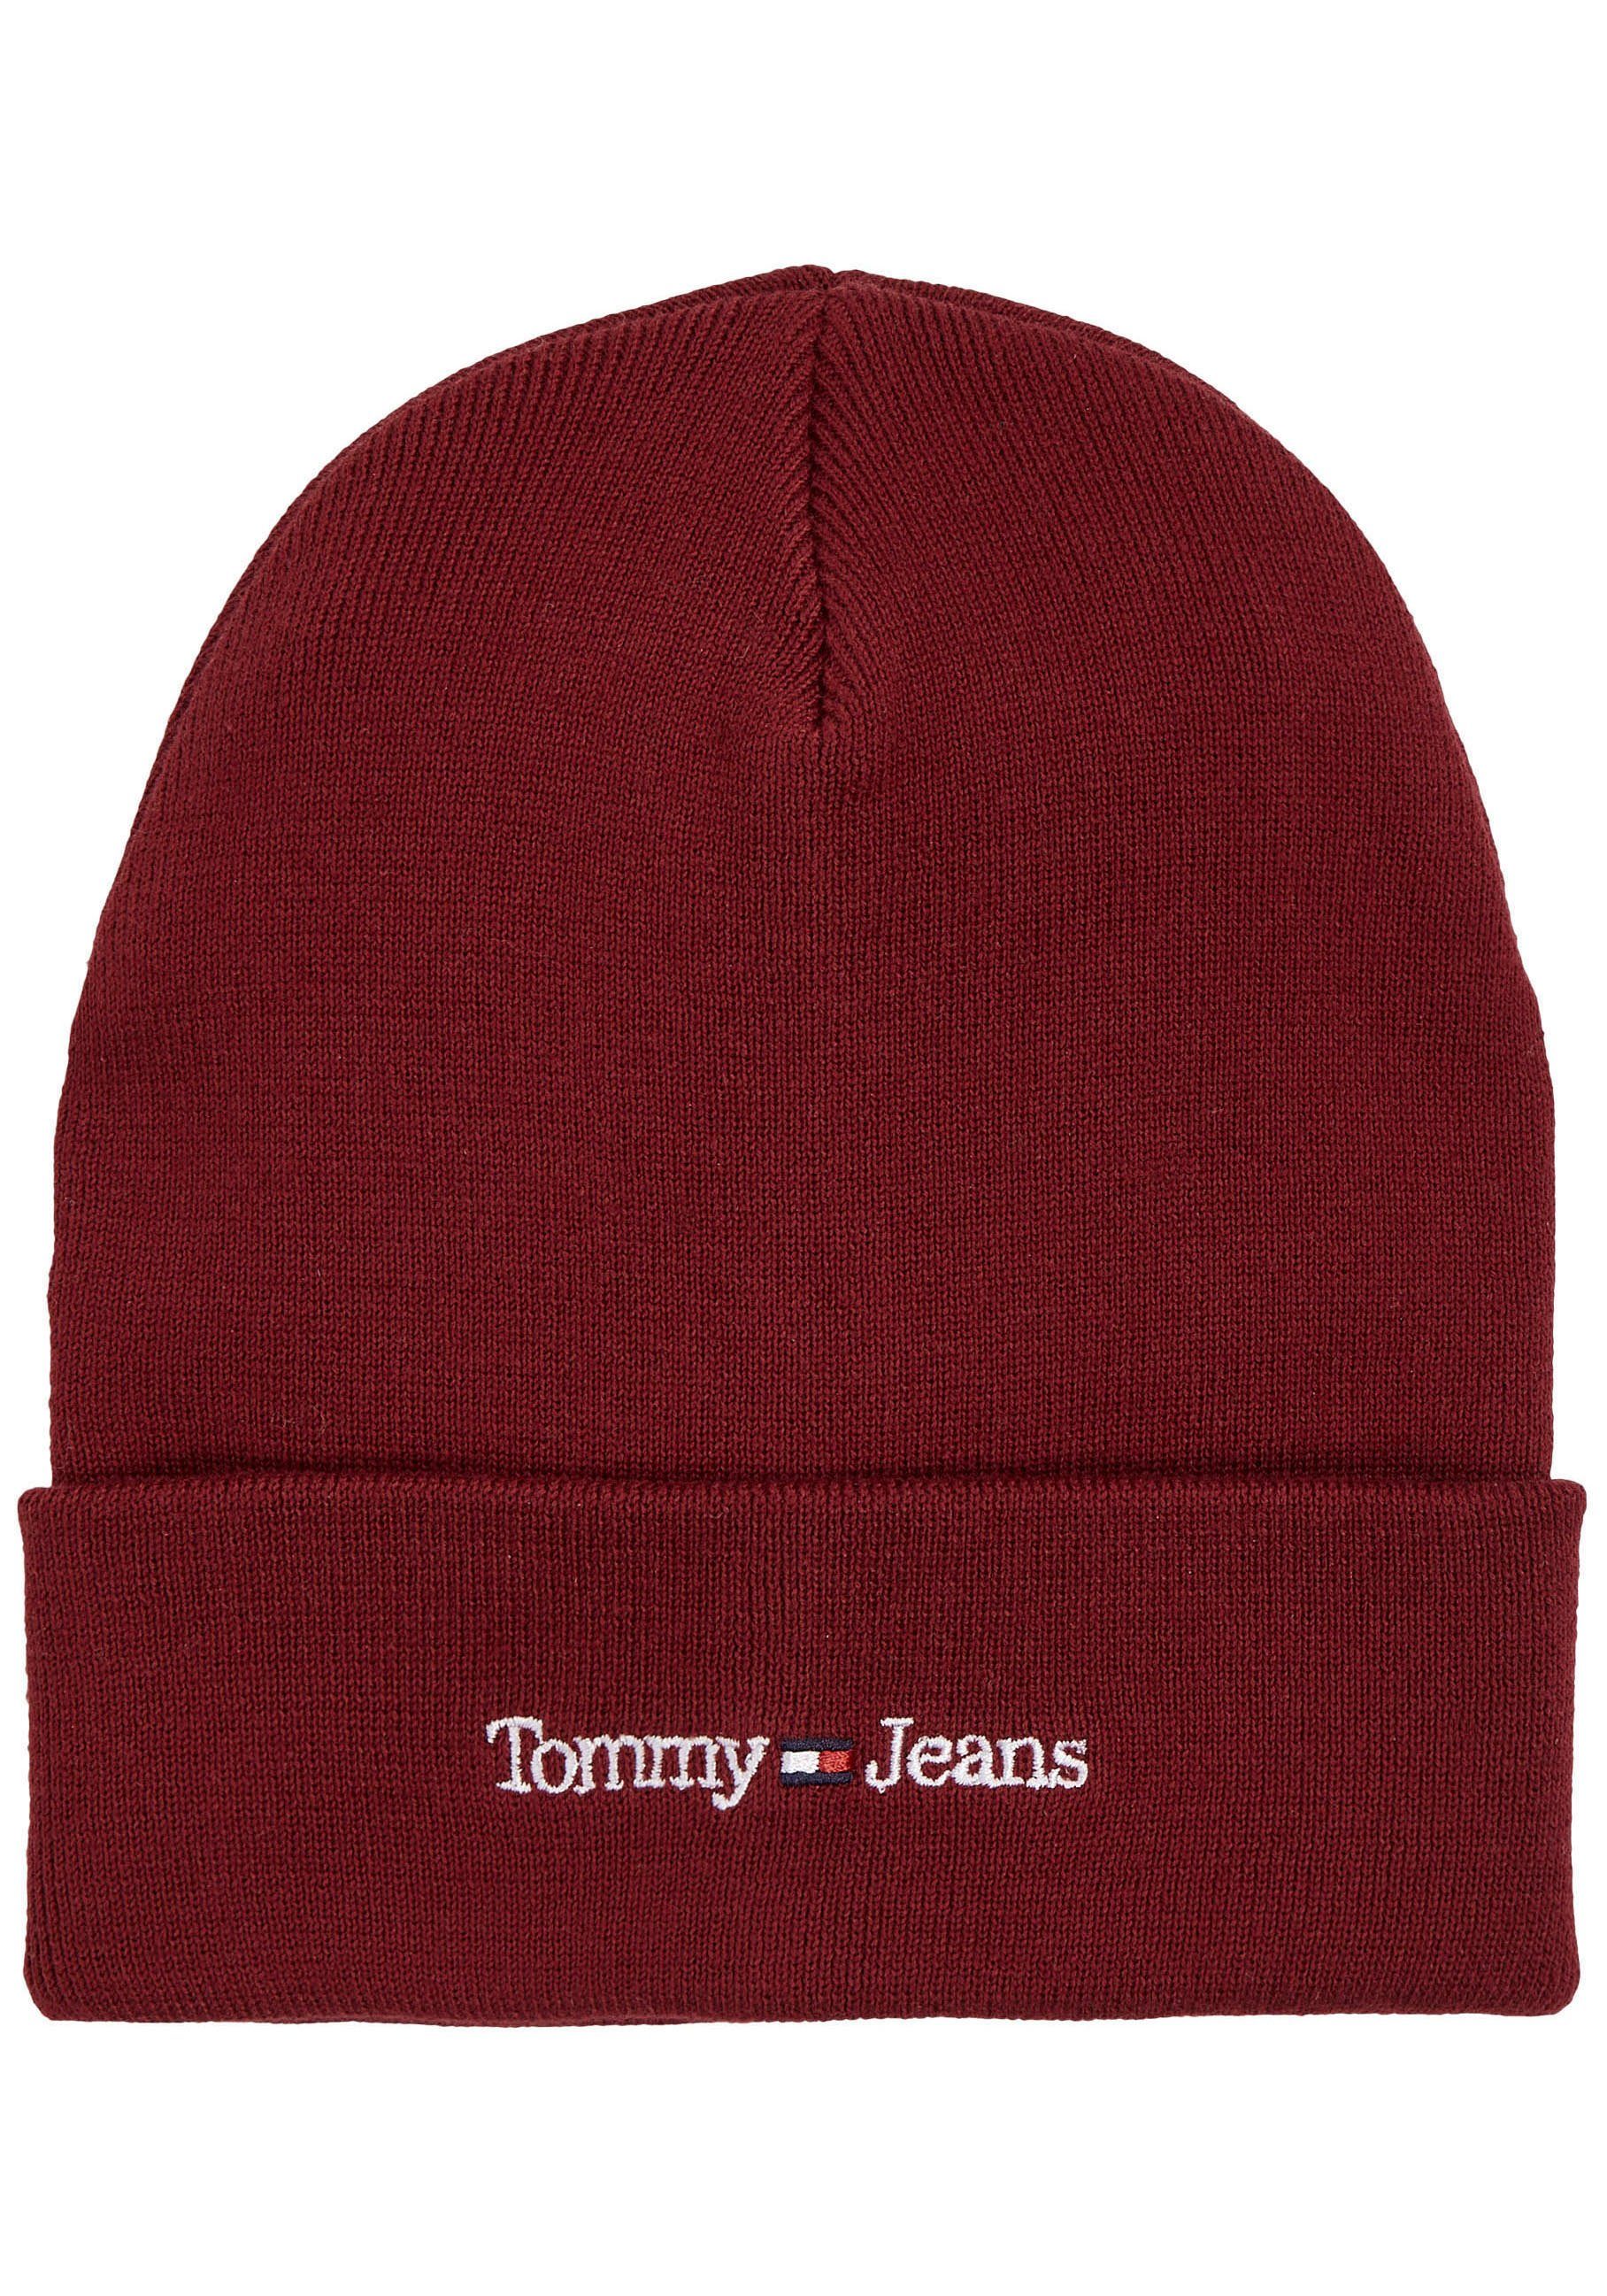 TJM Beanie Rouge BEANIE SPORT Jeans Tommy